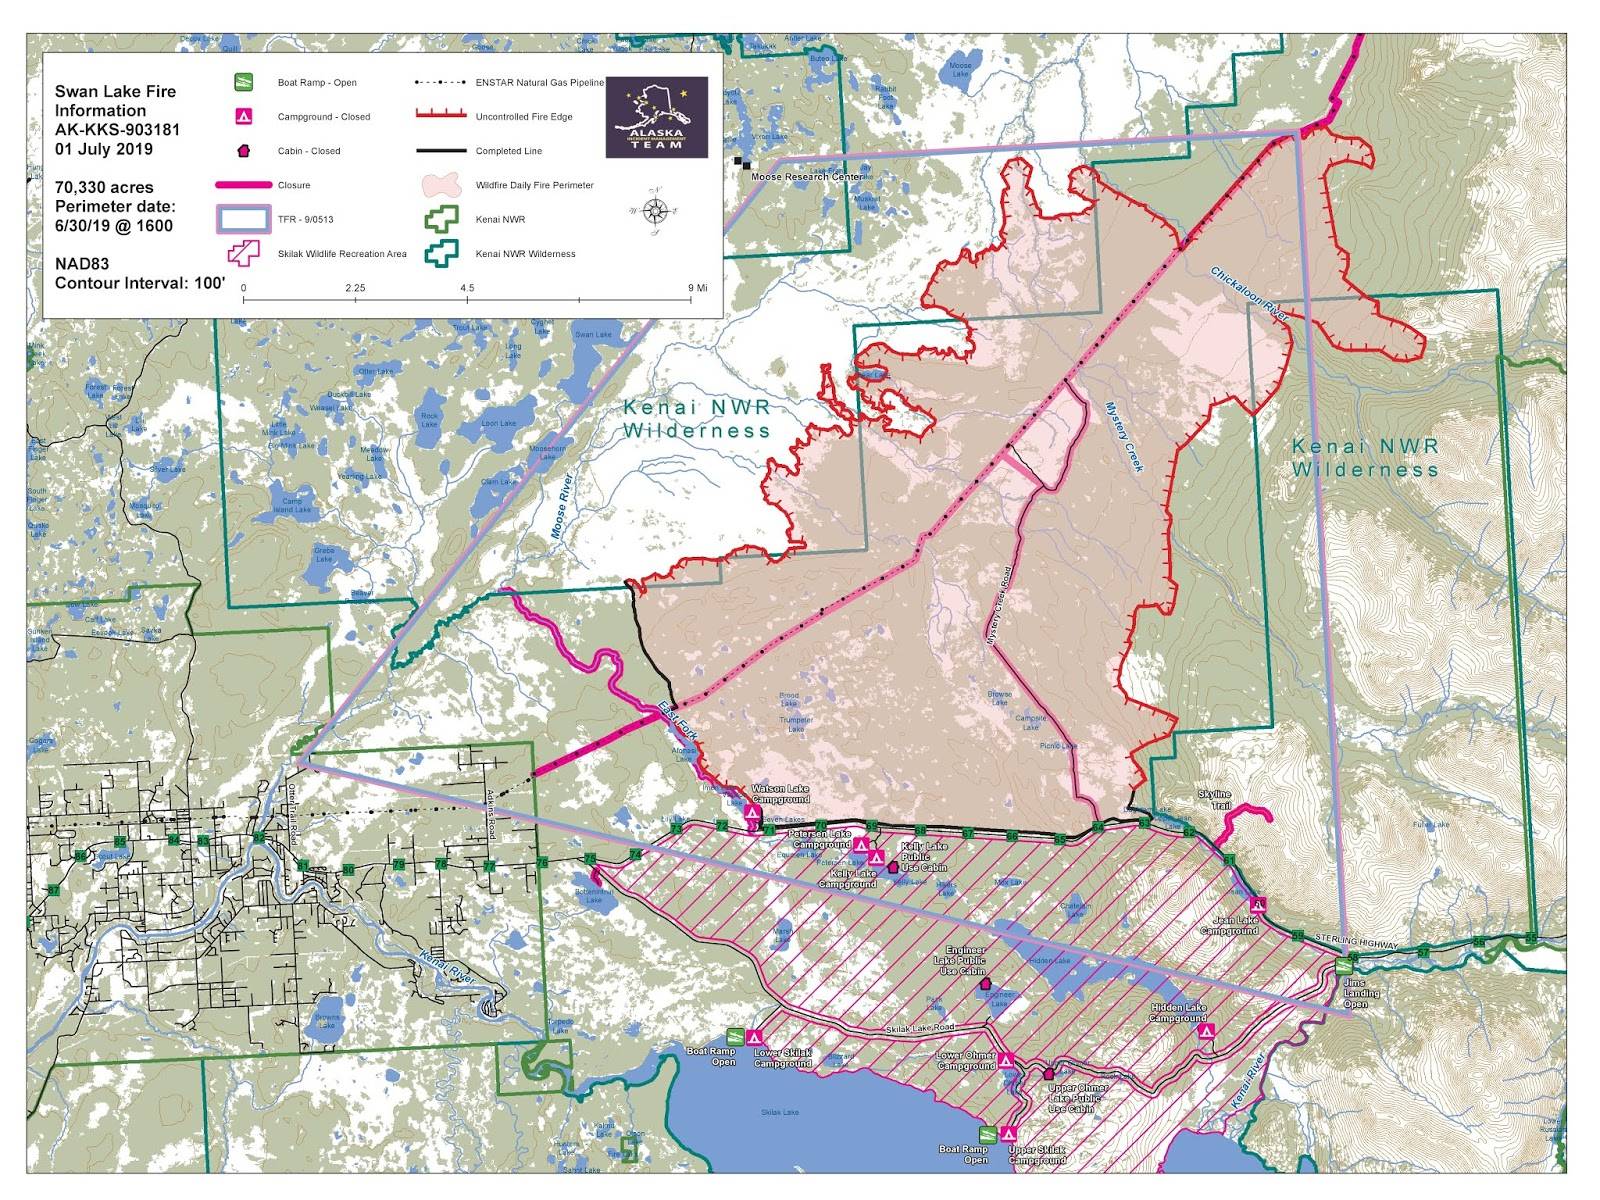 The extent of the Swan Lake Fire can be seen in this map released Monday. (Courtesy Alaska Incident Management Team)